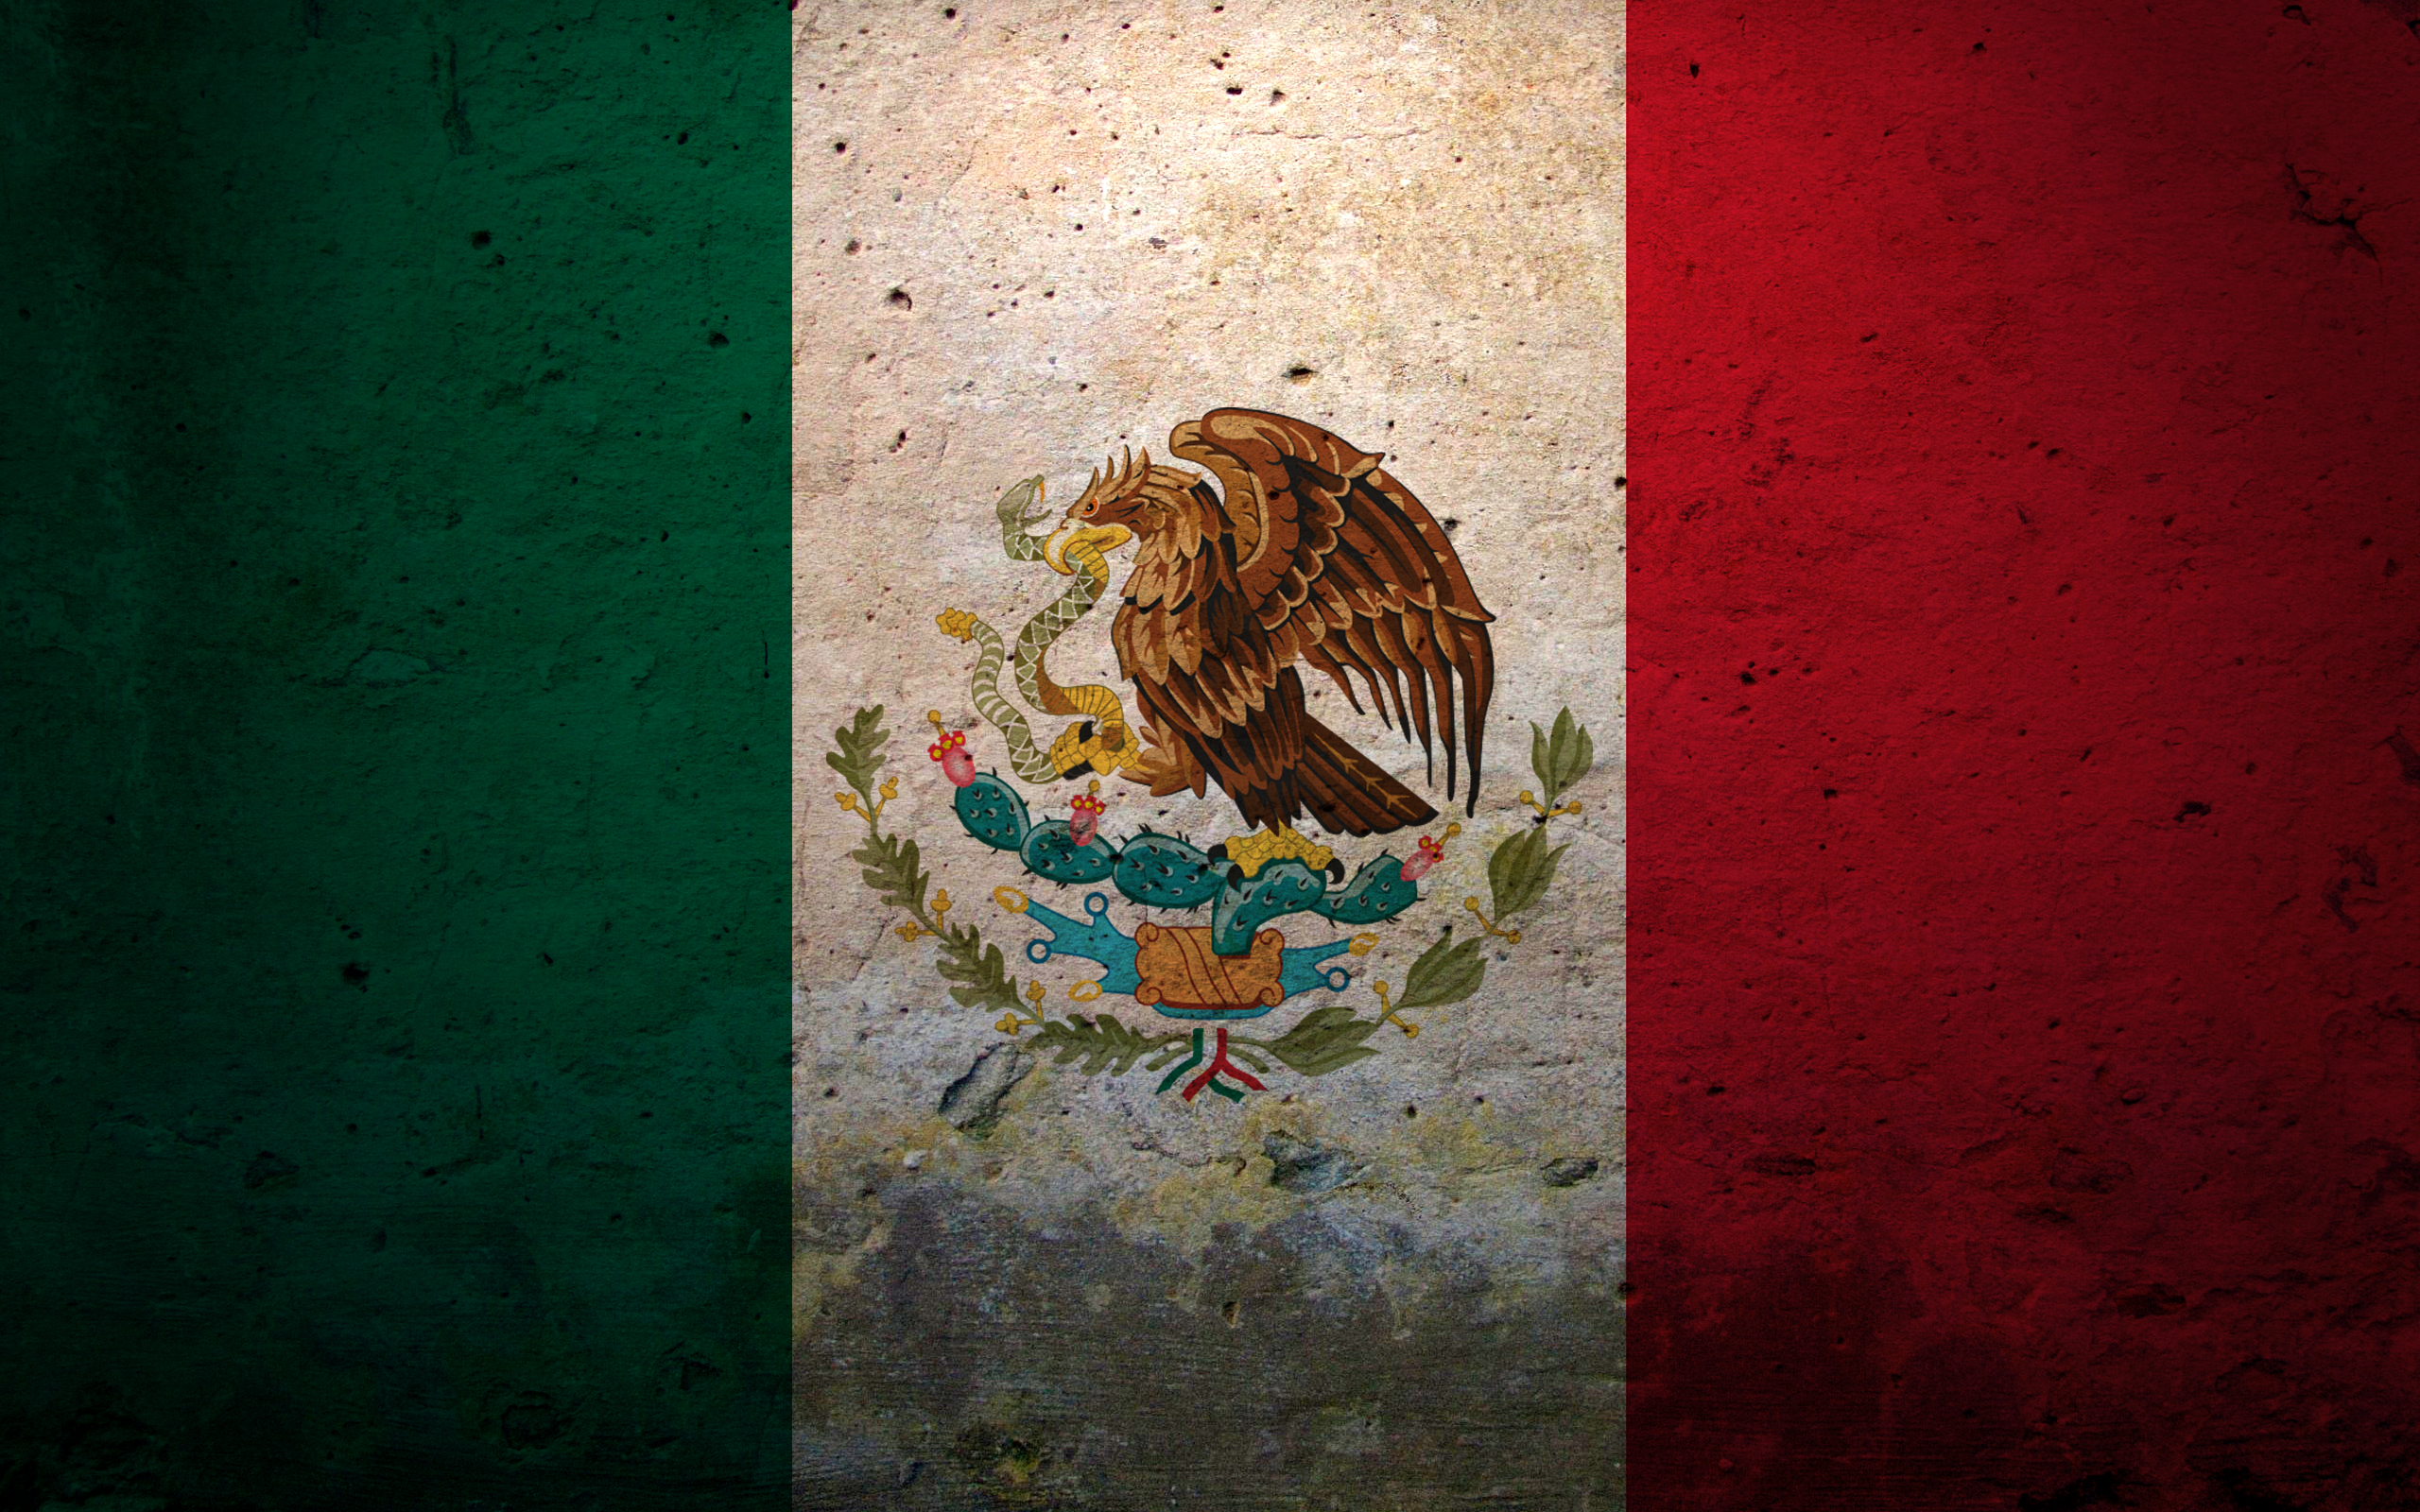 Mexico Flag Wallpapers - Wallpaper Cave